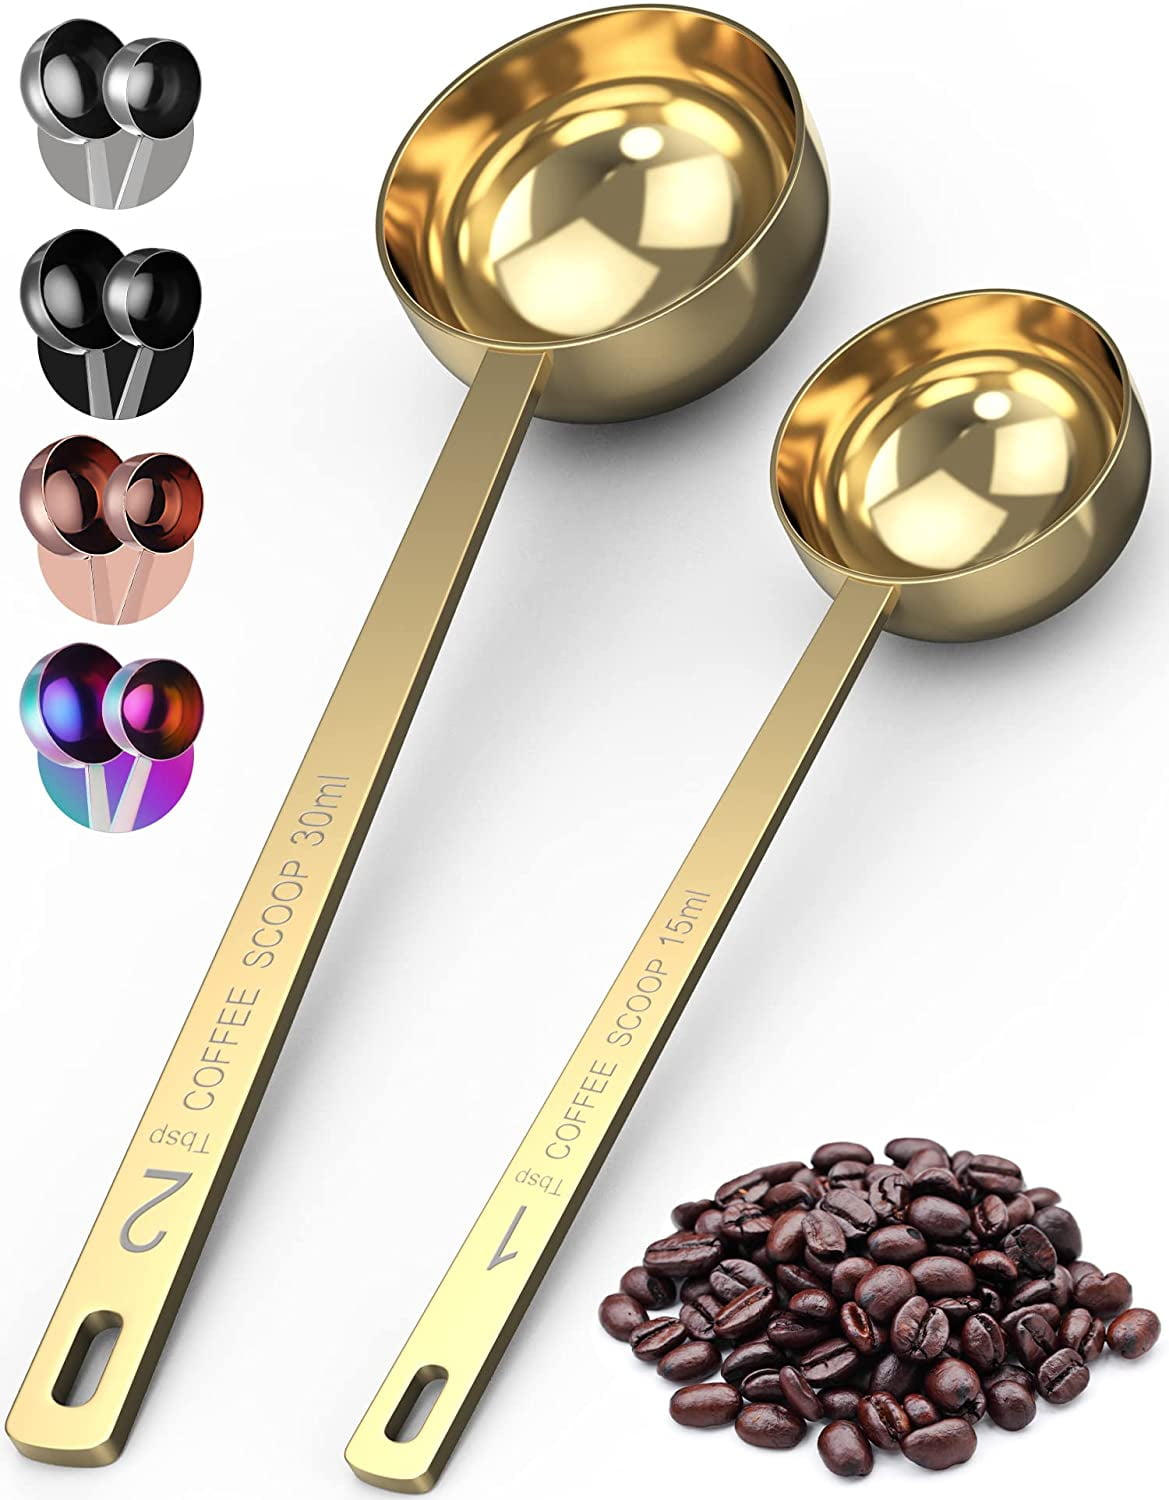 2 Perfect Coffee Measuring Spoon Scoop 1/8 Cup Handled Protein Grains Tablespoon